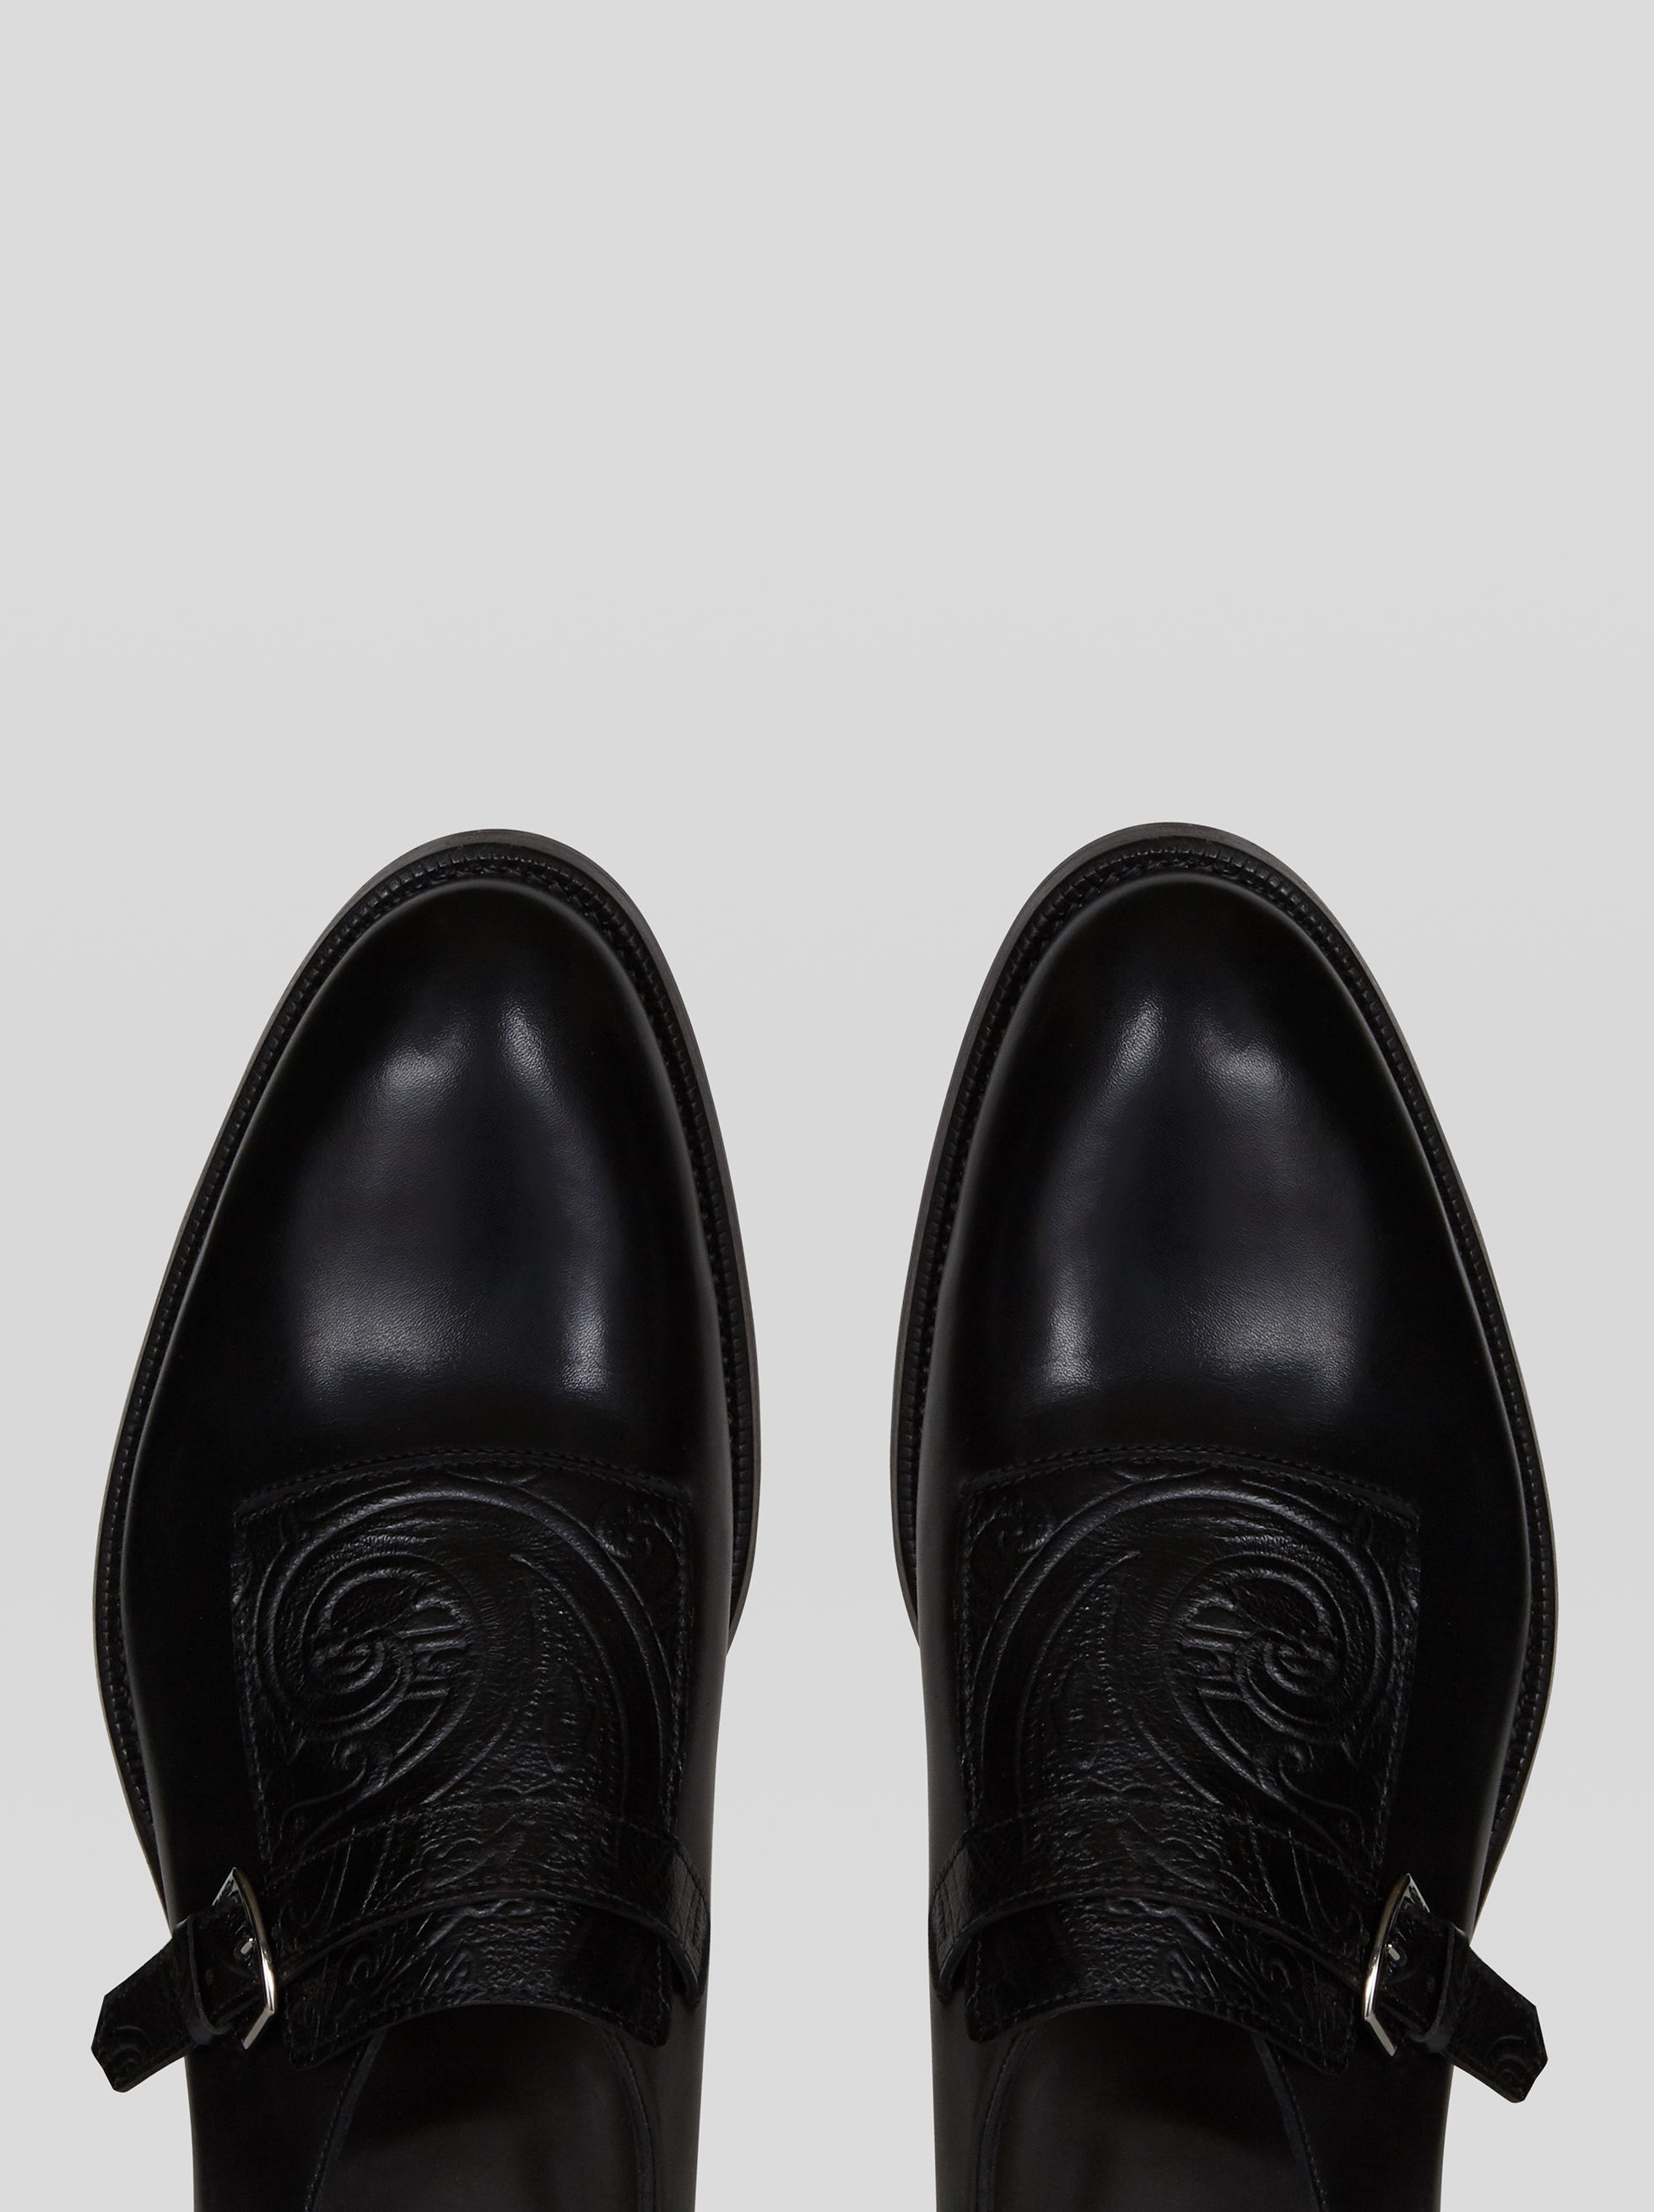 LEATHER MONK STRAPS WITH PAISLEY PATTERN - 2